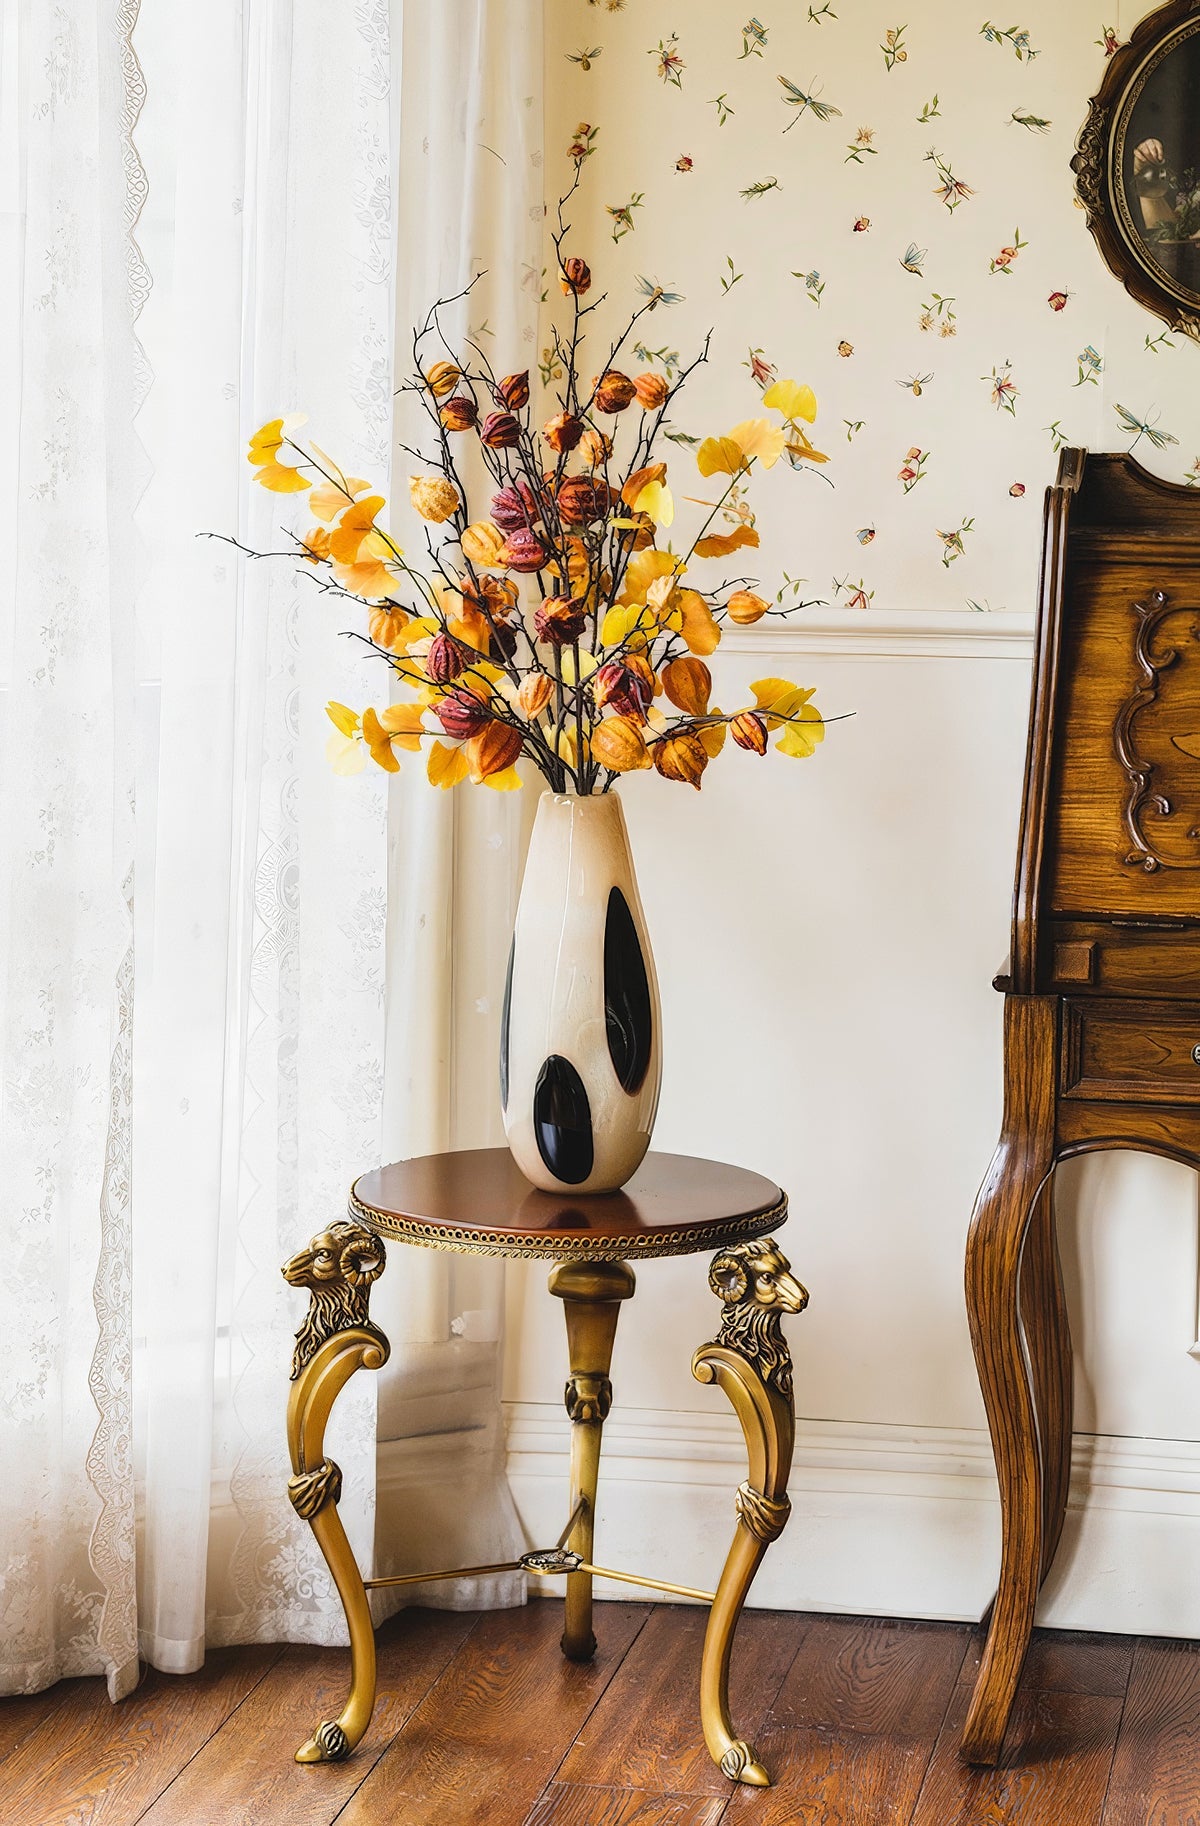 A uniquely shaped vase with black accents stands on an ornate golden-legged table, holding branches with vibrant autumn leaves, against a patterned wall.